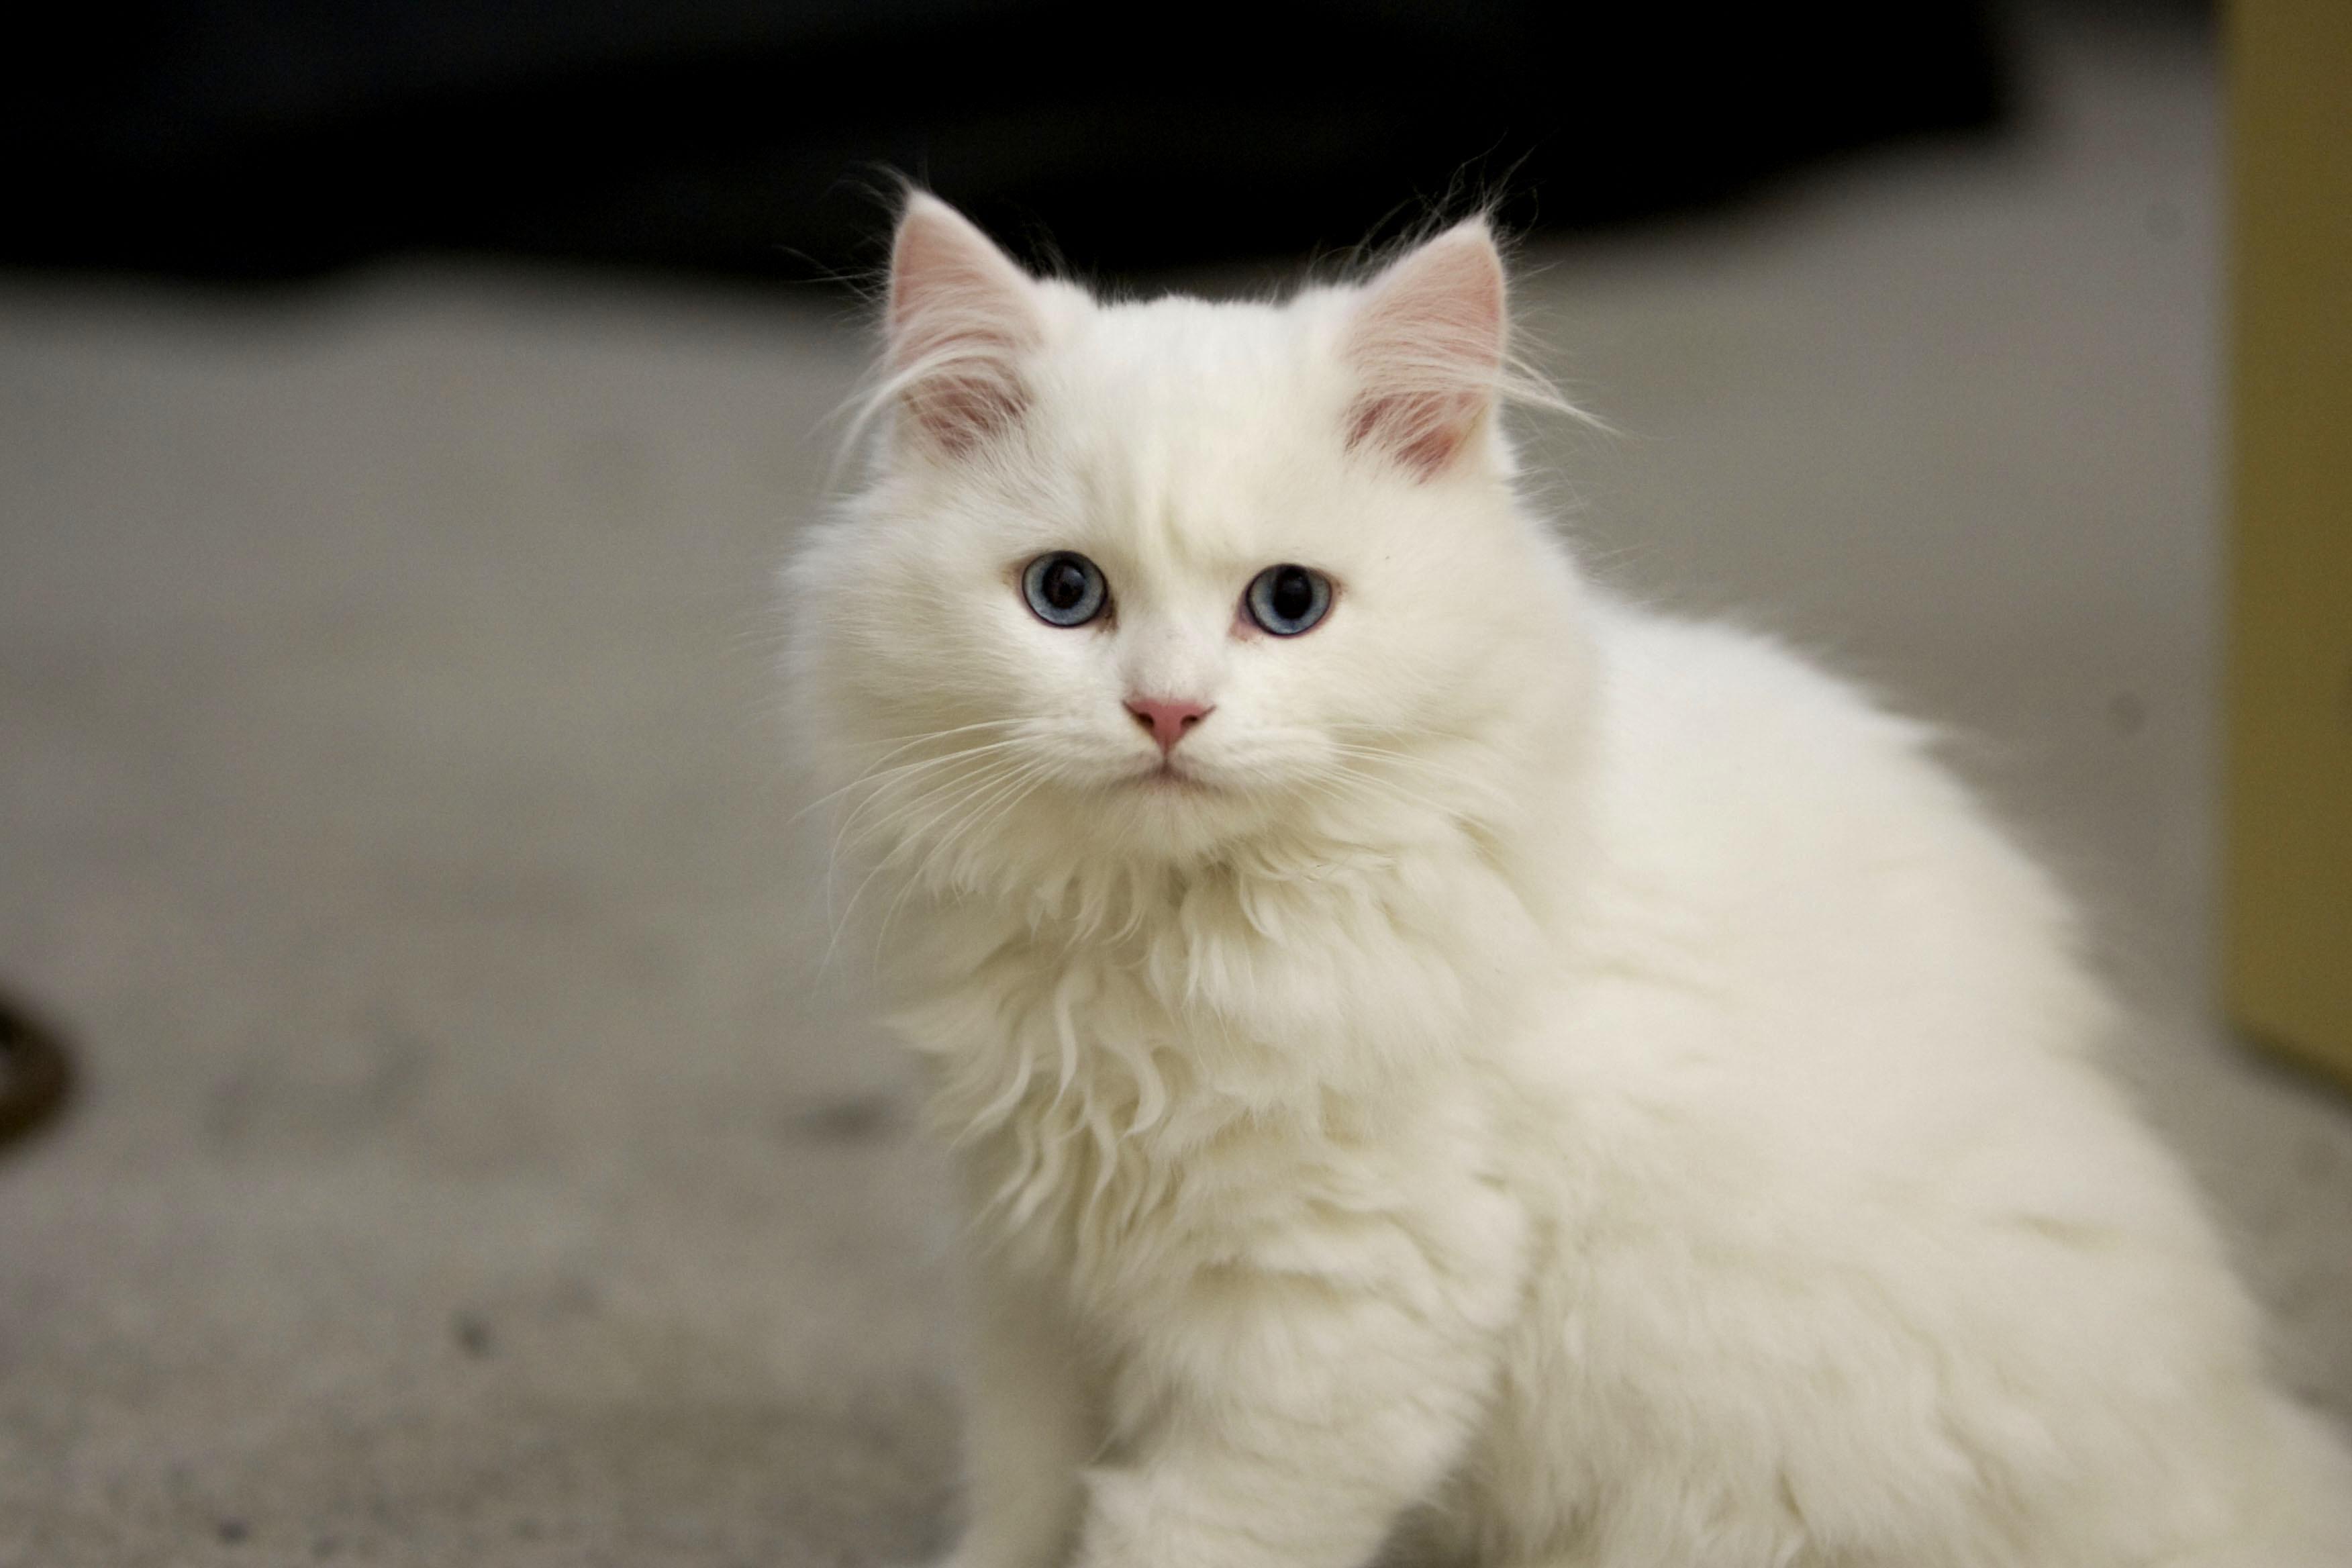 White fluffy cat with blue eyes wallpaper and image